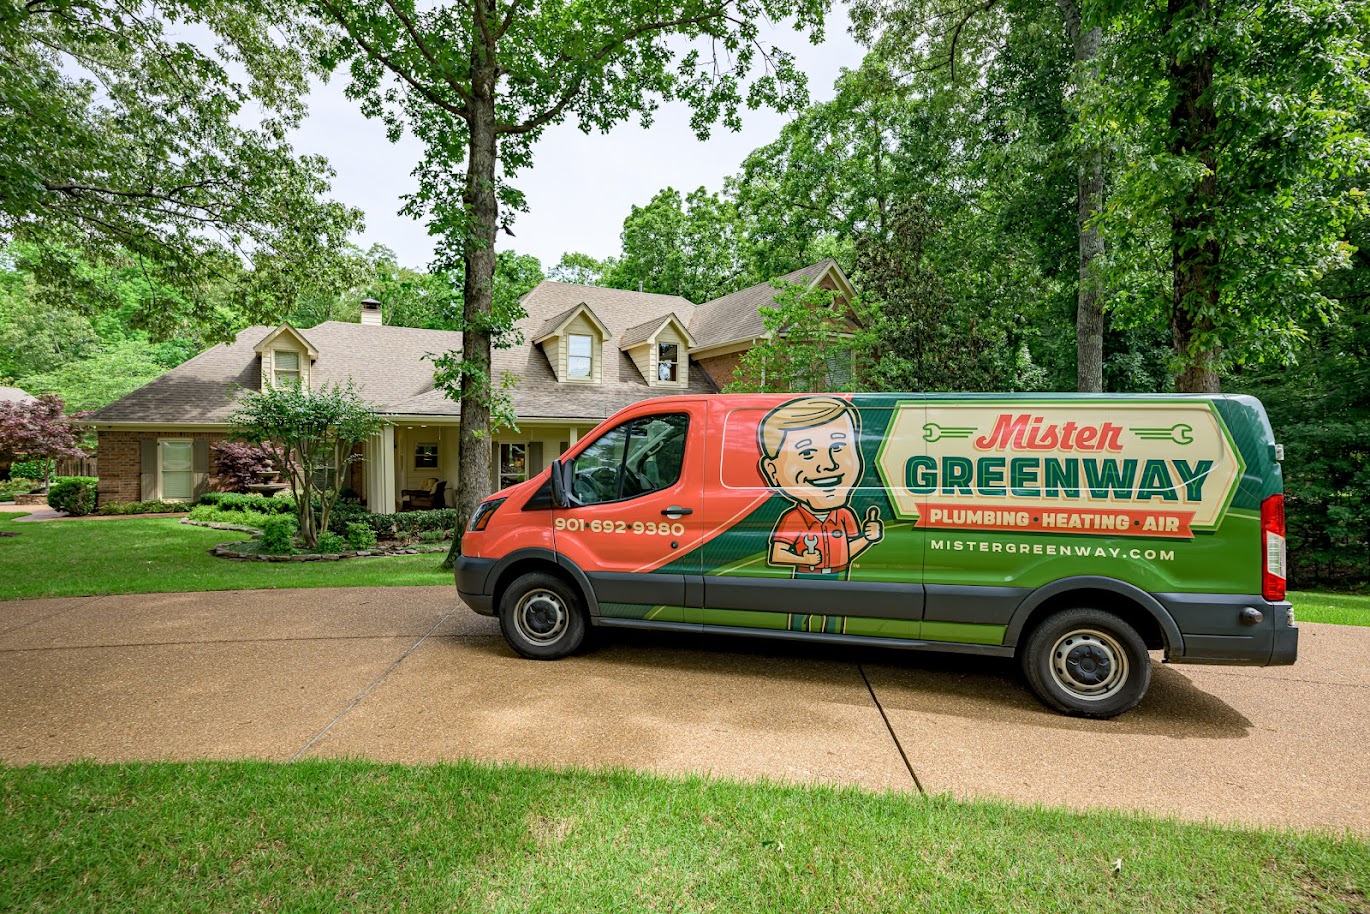 Mister Greenway Plumbing, Heating & Air Conditioning